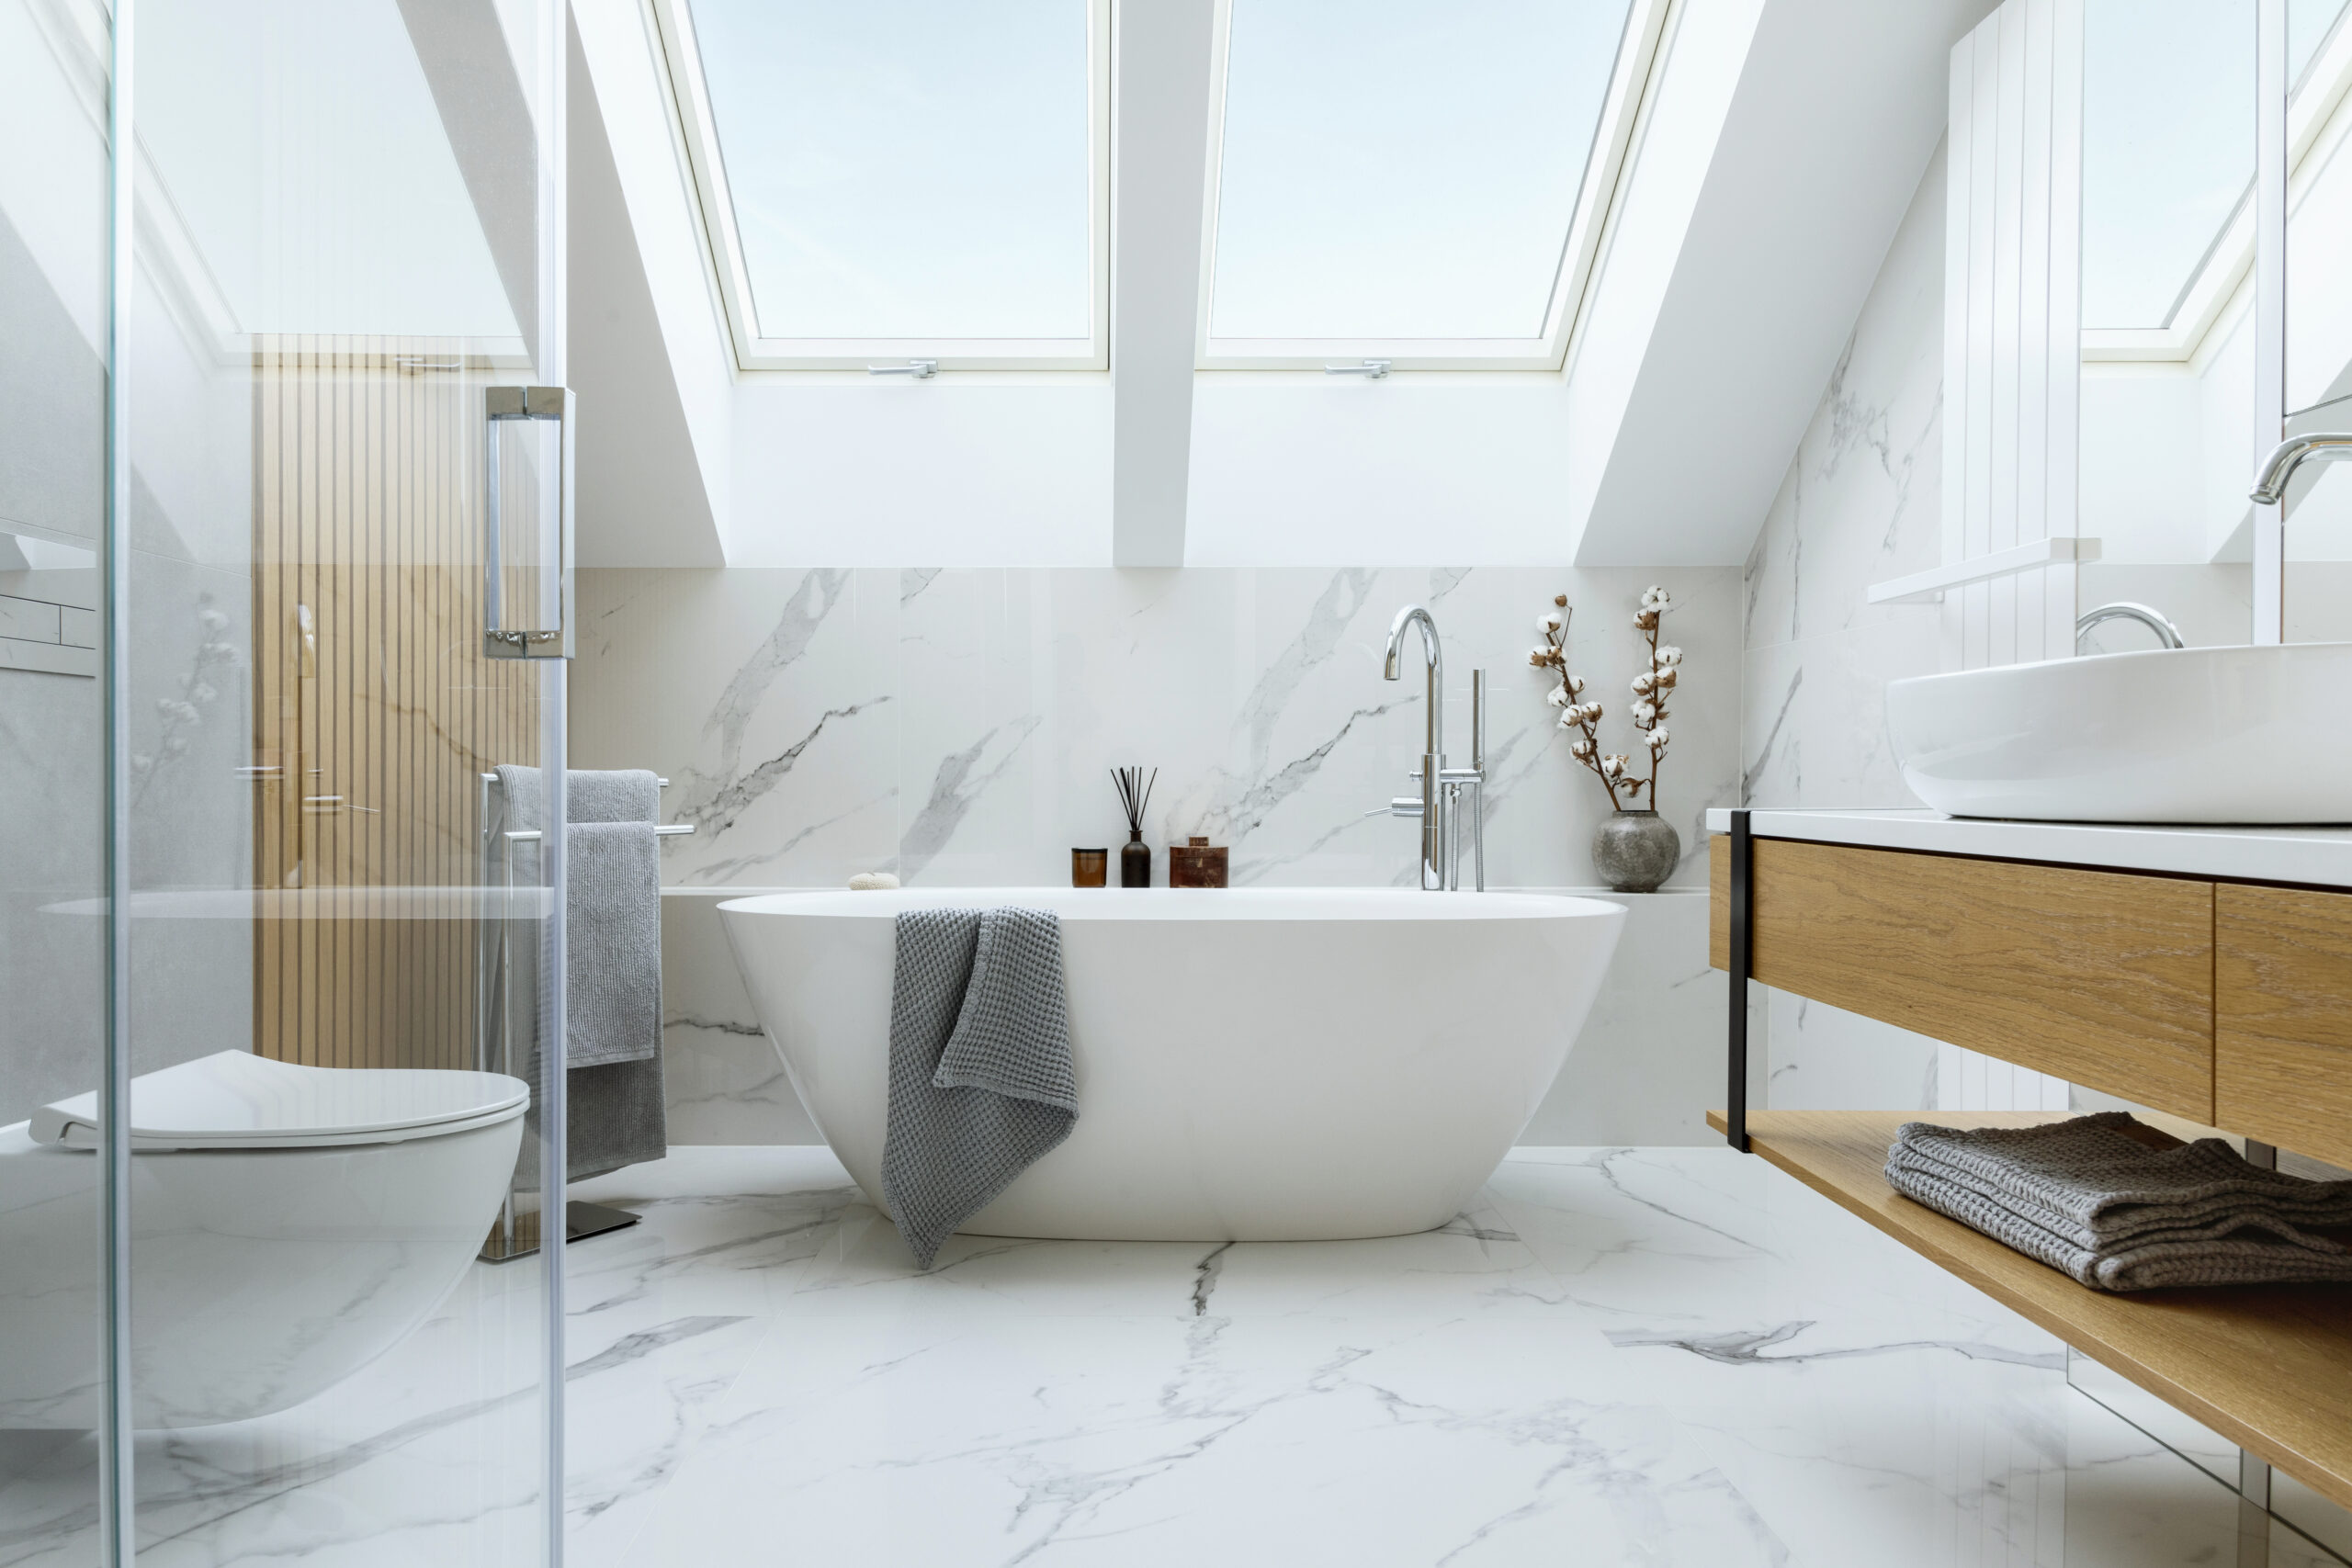 How to Choose the Right Bathroom Design